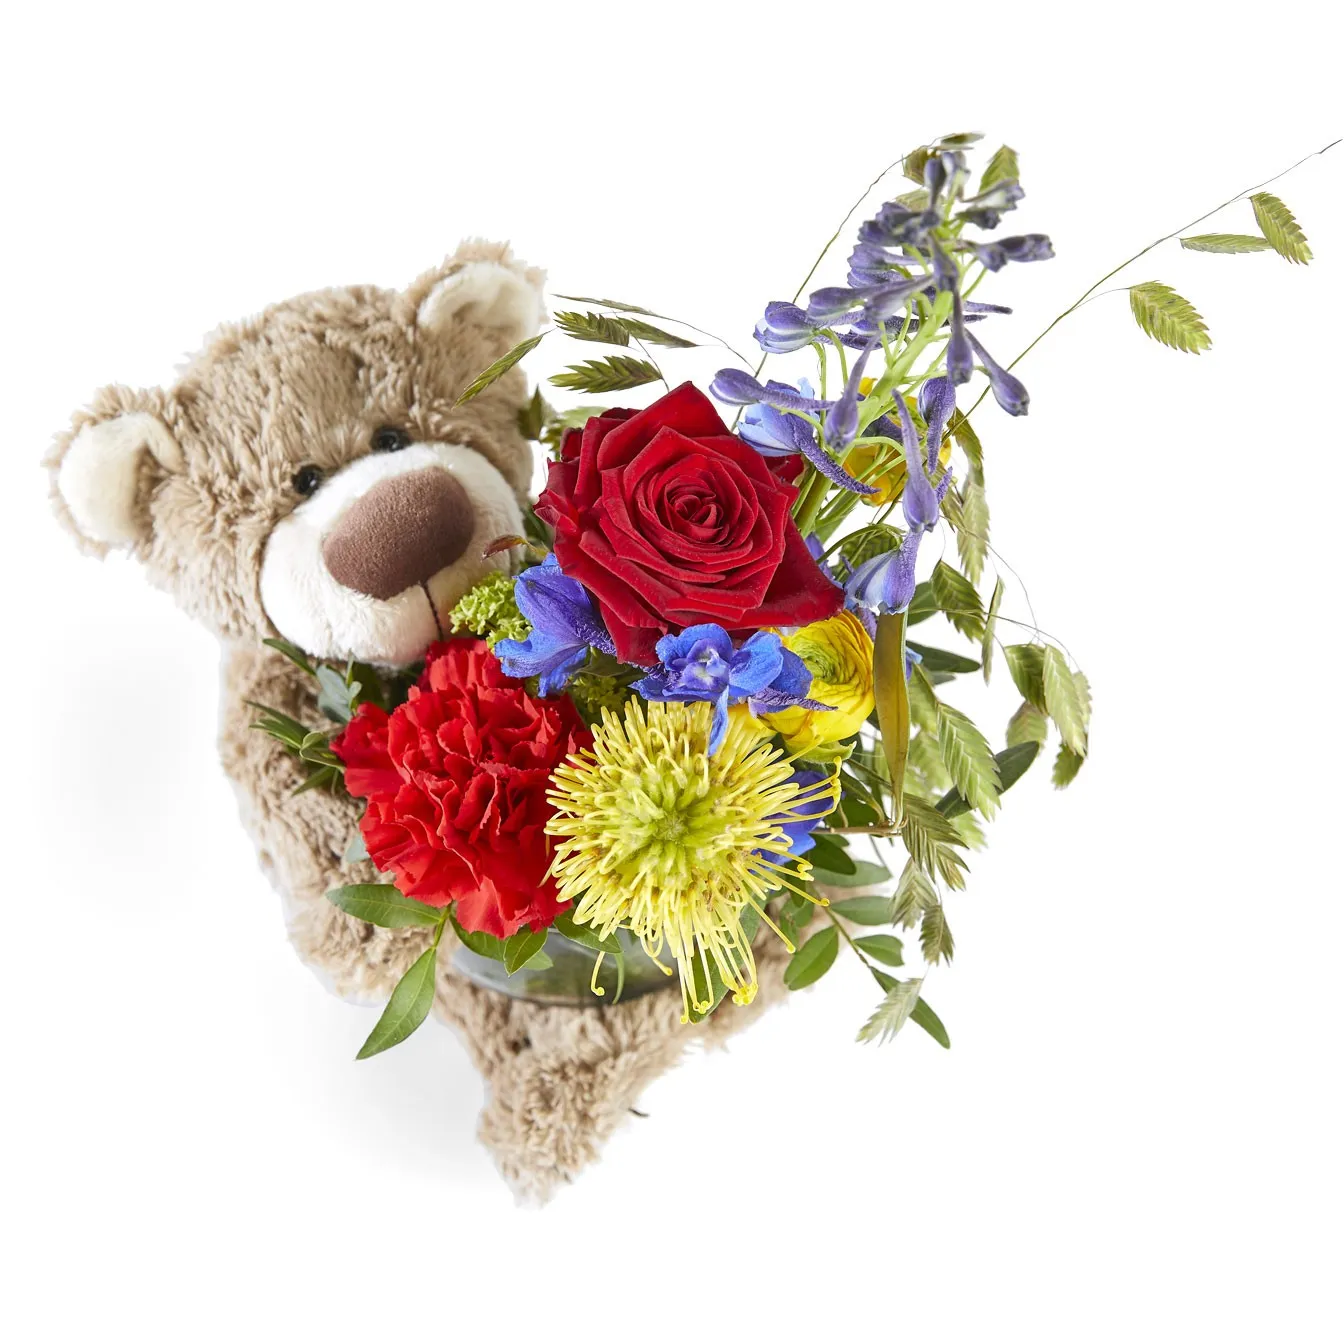 Funeral - Bear with little flower tuft